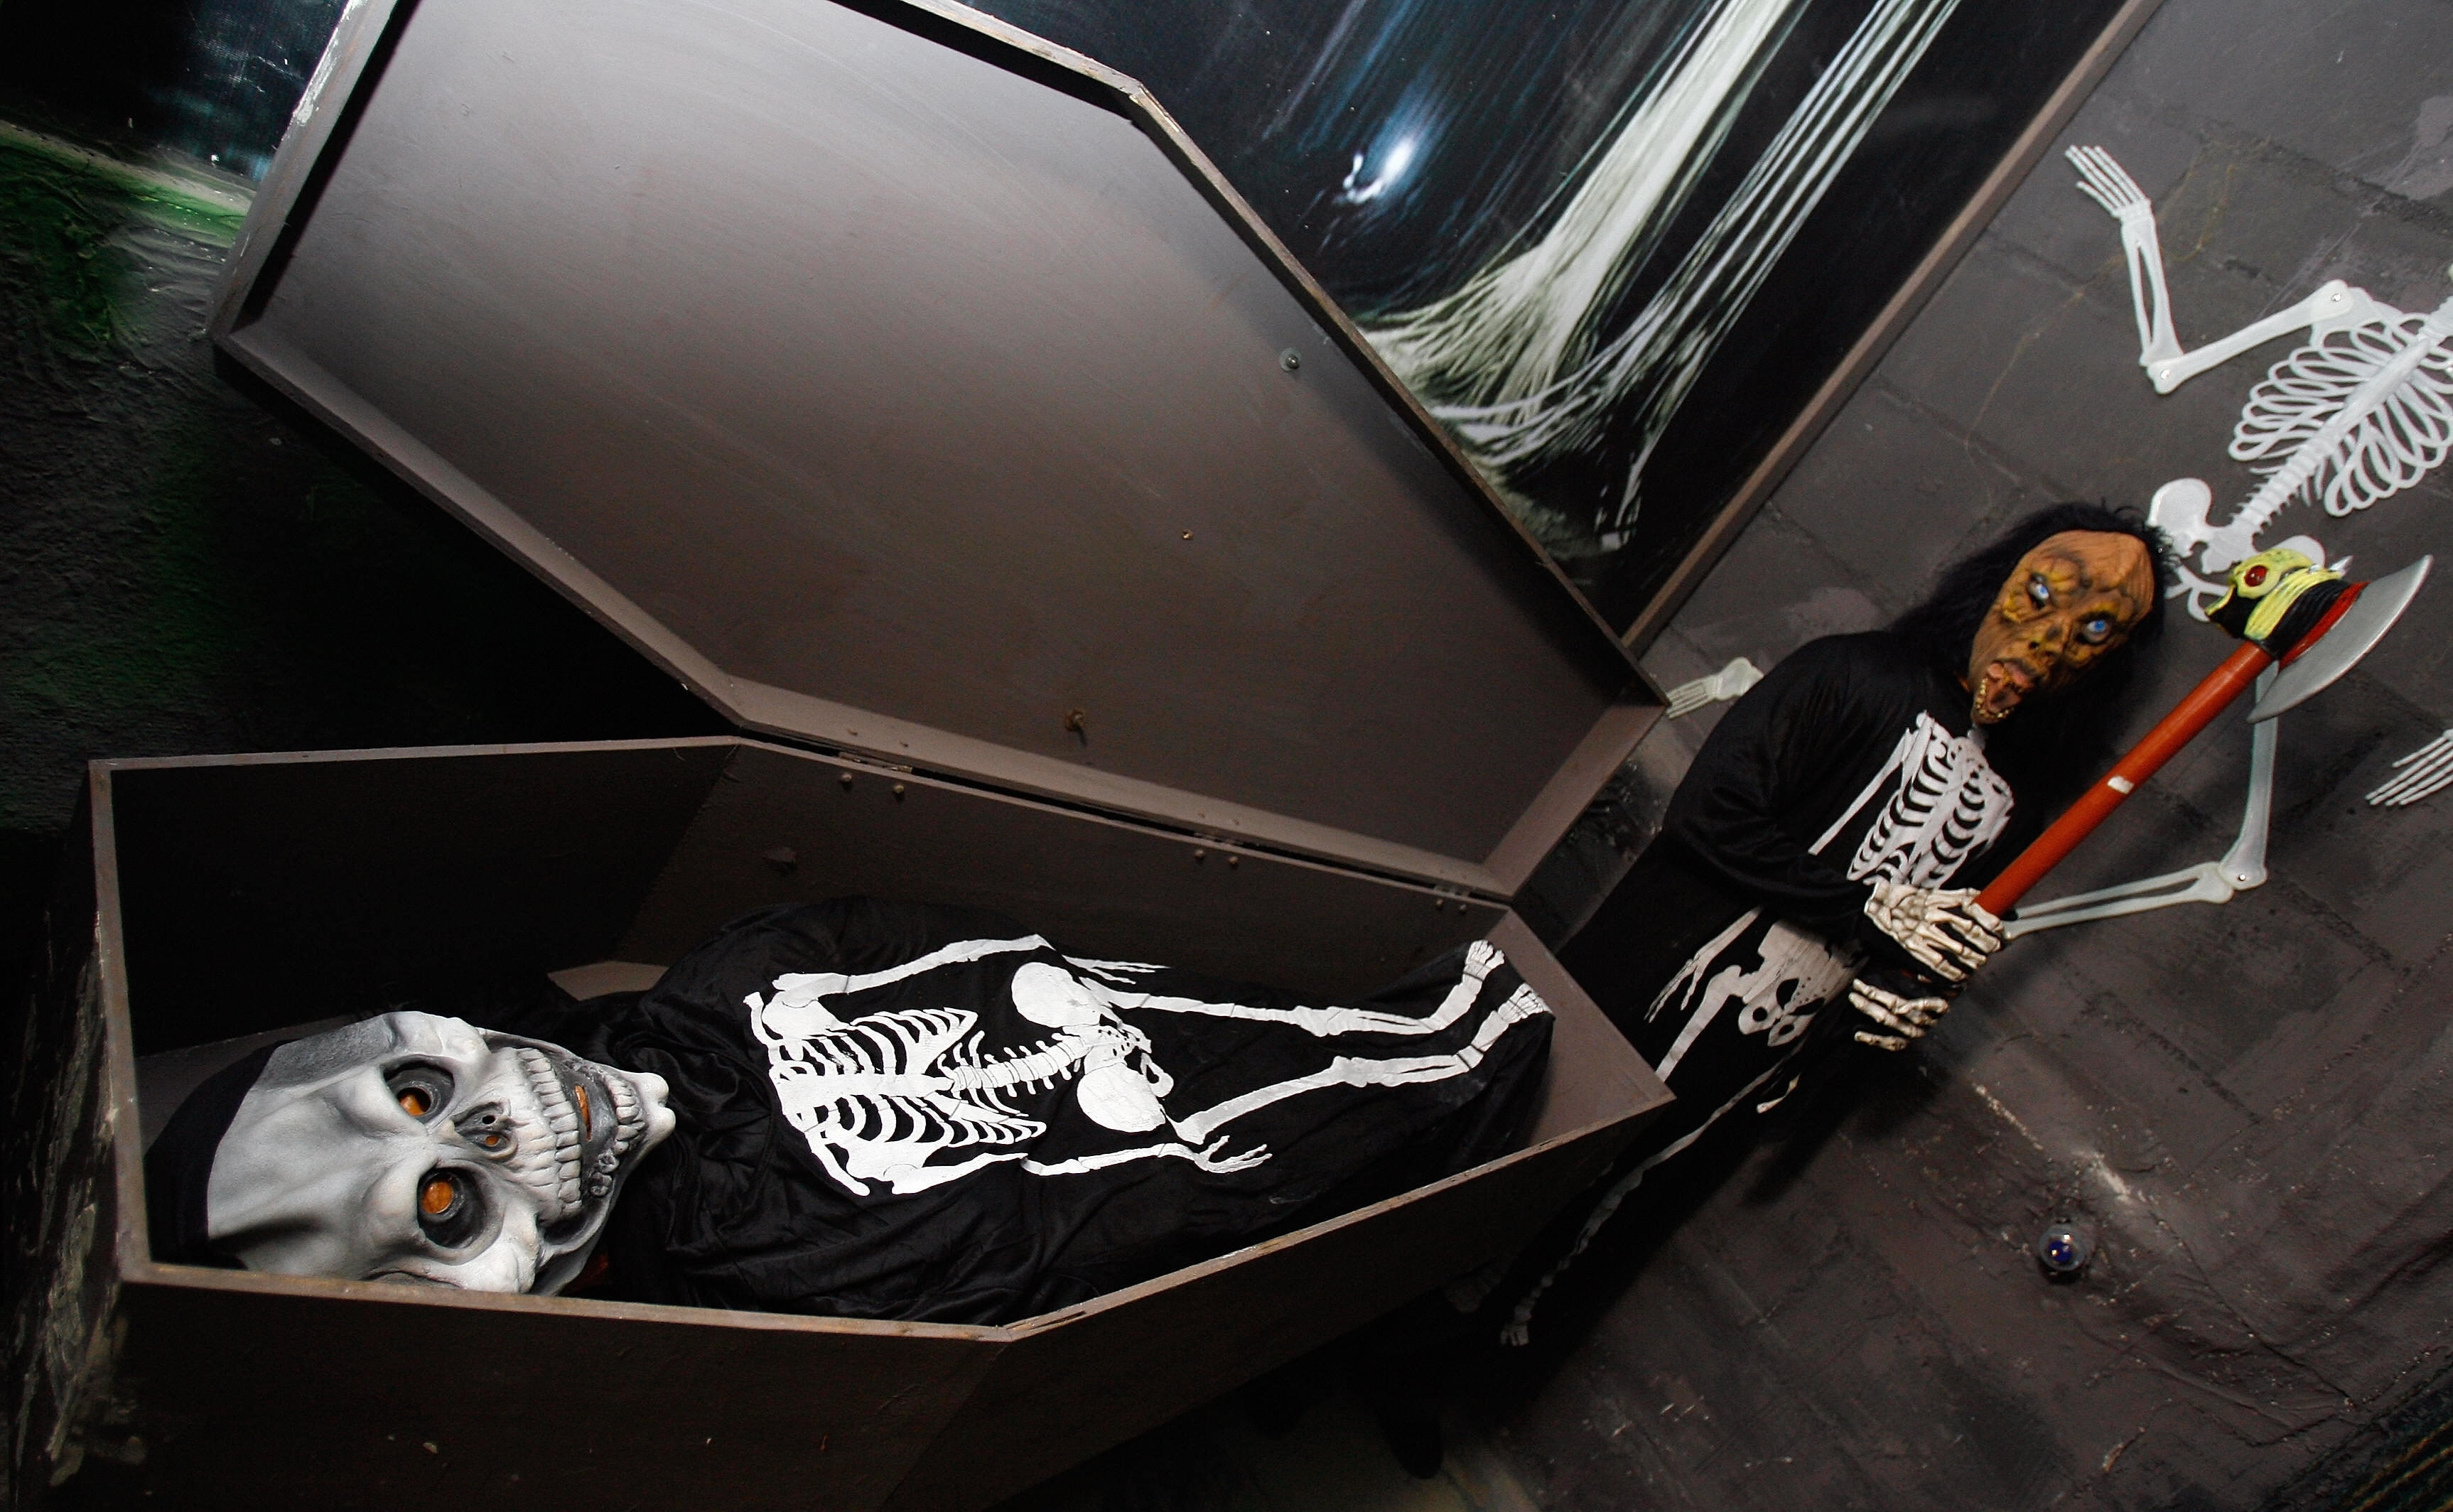 Say What? Six Flags In St. Louis Is Challenging People To Spend 30 Hours In A Coffin For $300 ...